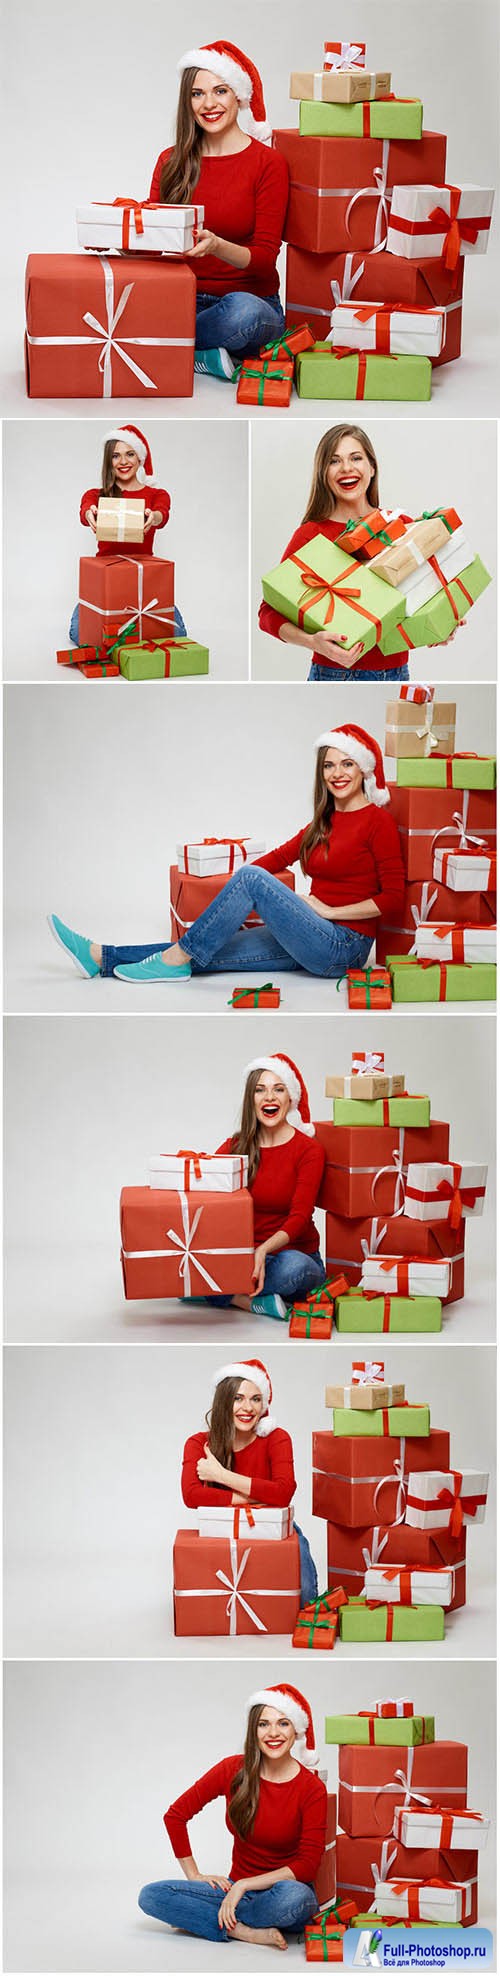 New Year and Christmas stock photos 80